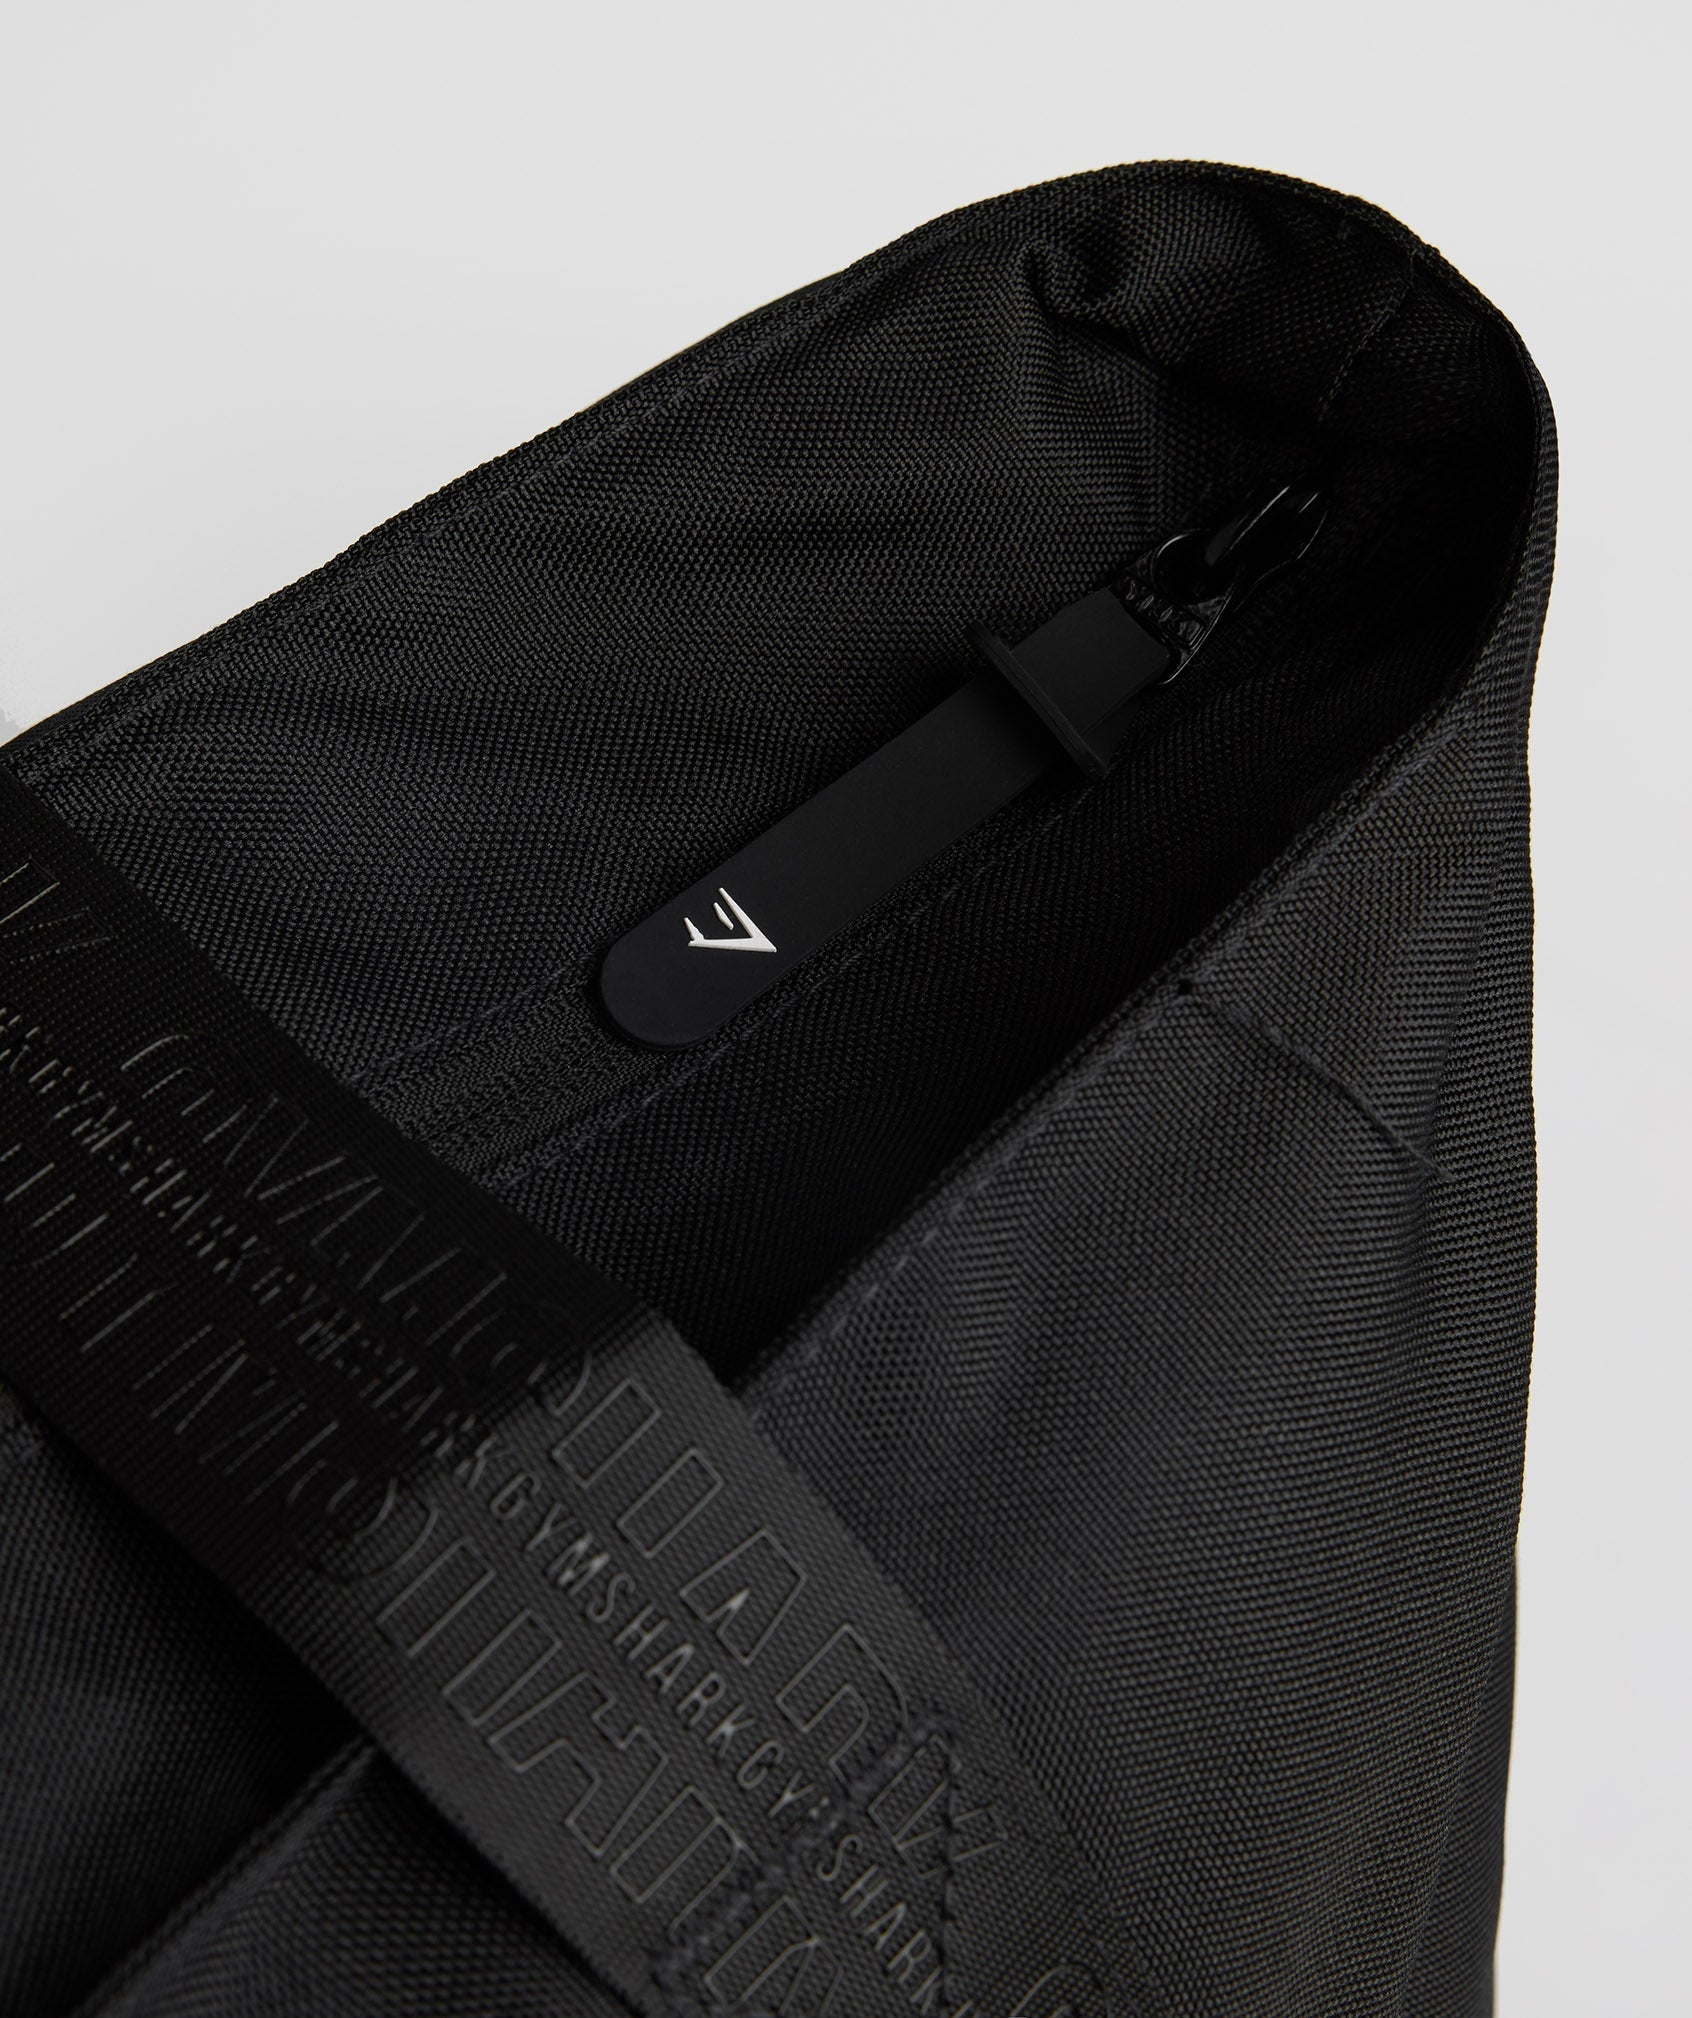 Everyday Tote in Black - view 6